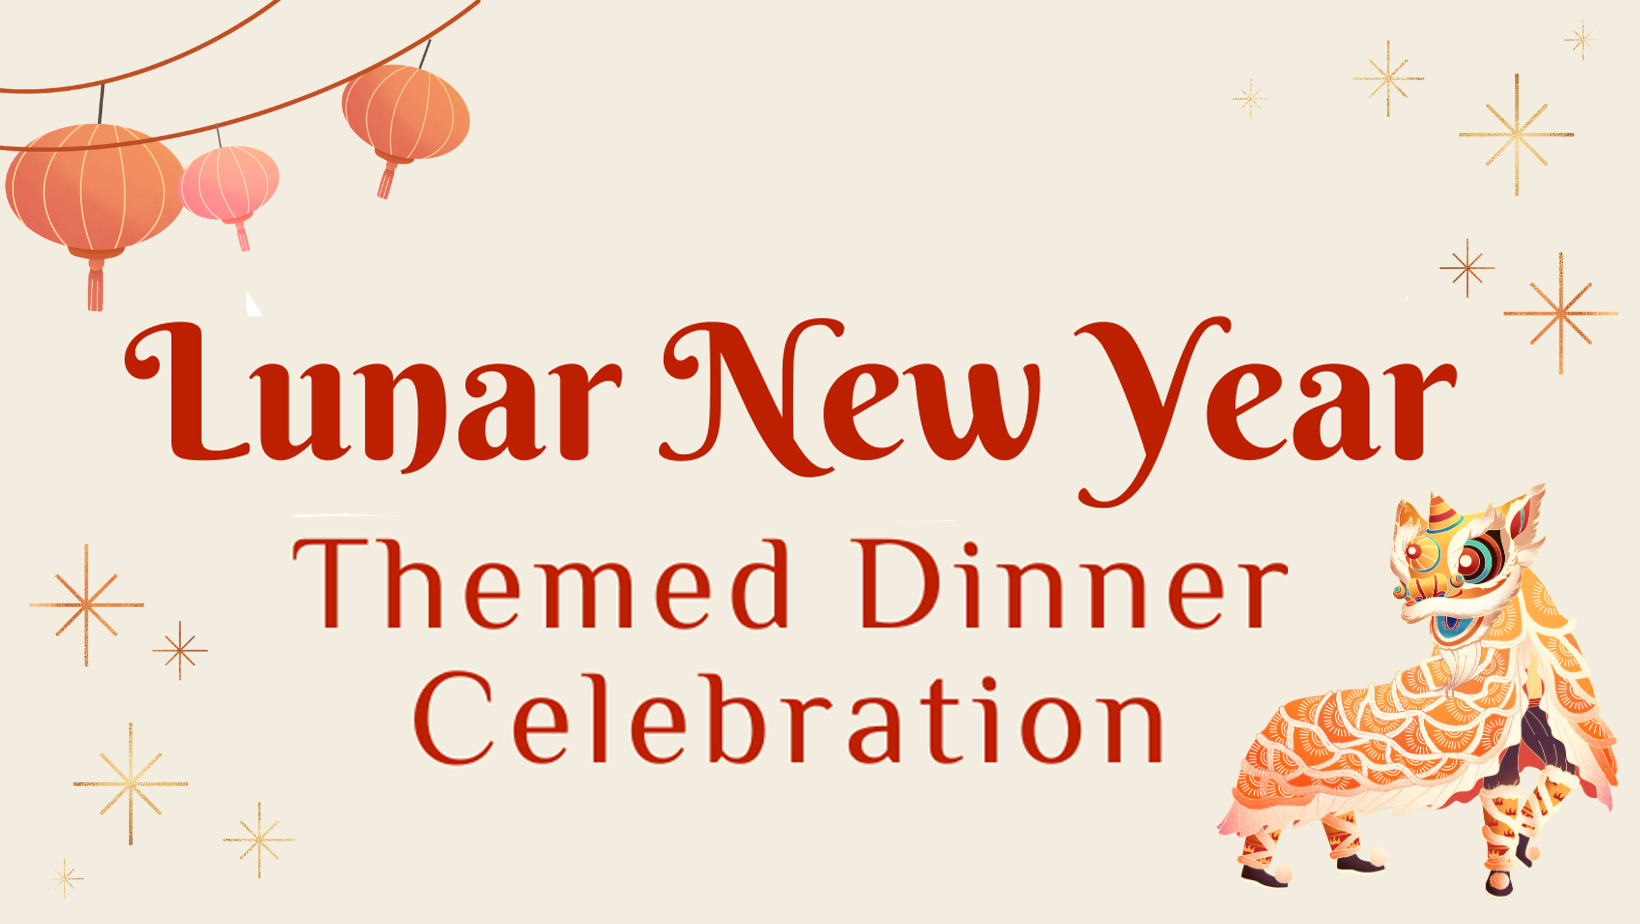 Lunar New Year Themed Dinner Celebration header with hanging lamp and dragon illustrations